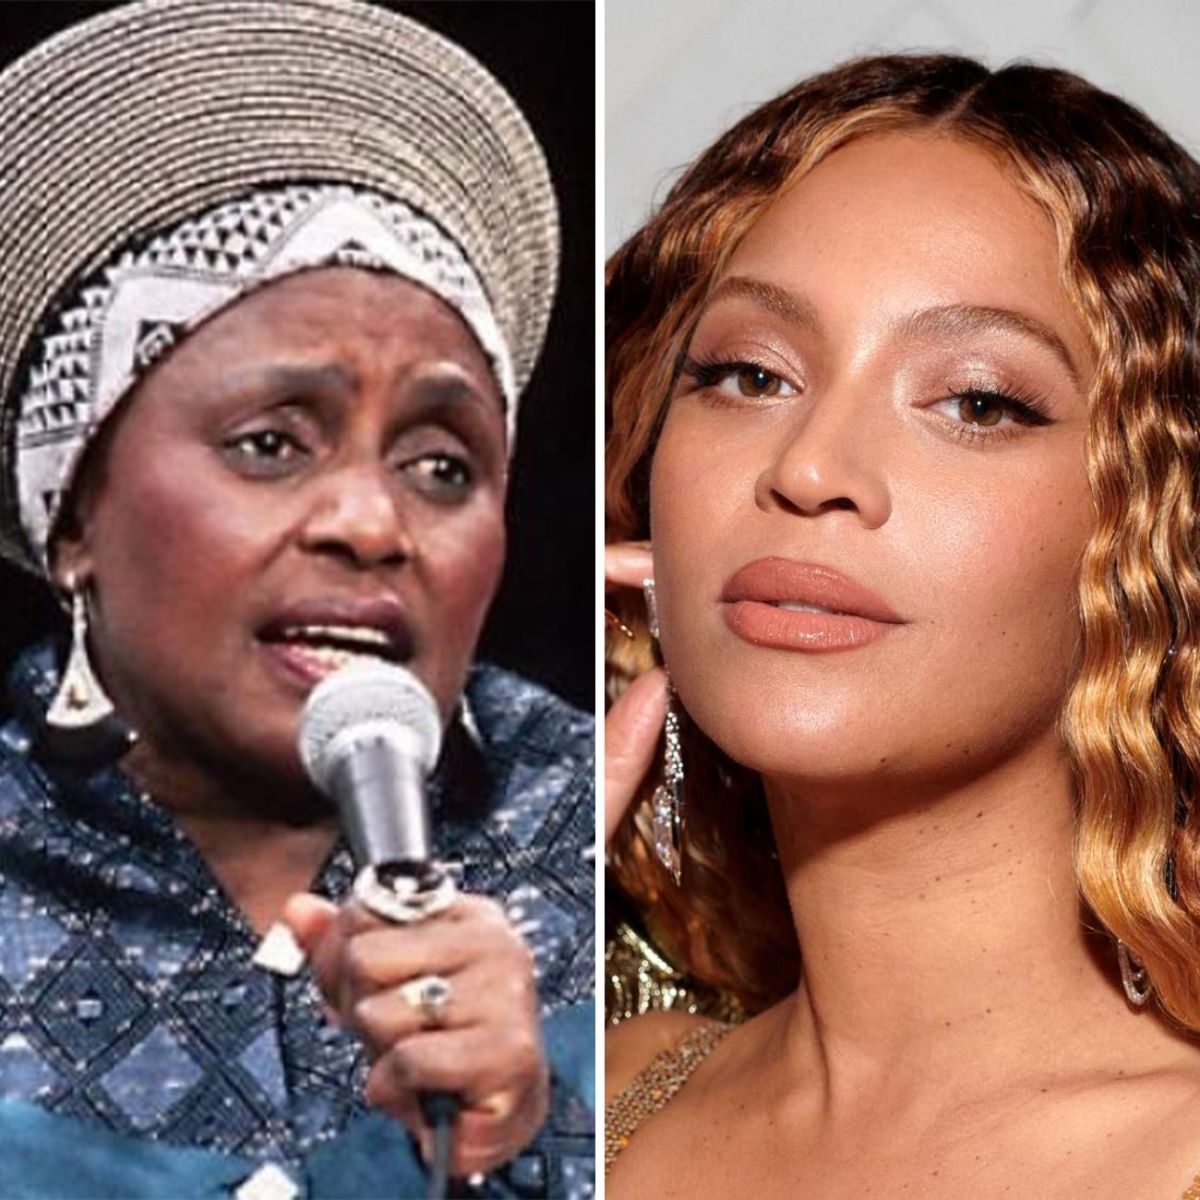 &Quot;Mama Africa&Quot; Title Sparks Heated Debate Among Music Fans On Social Media 3